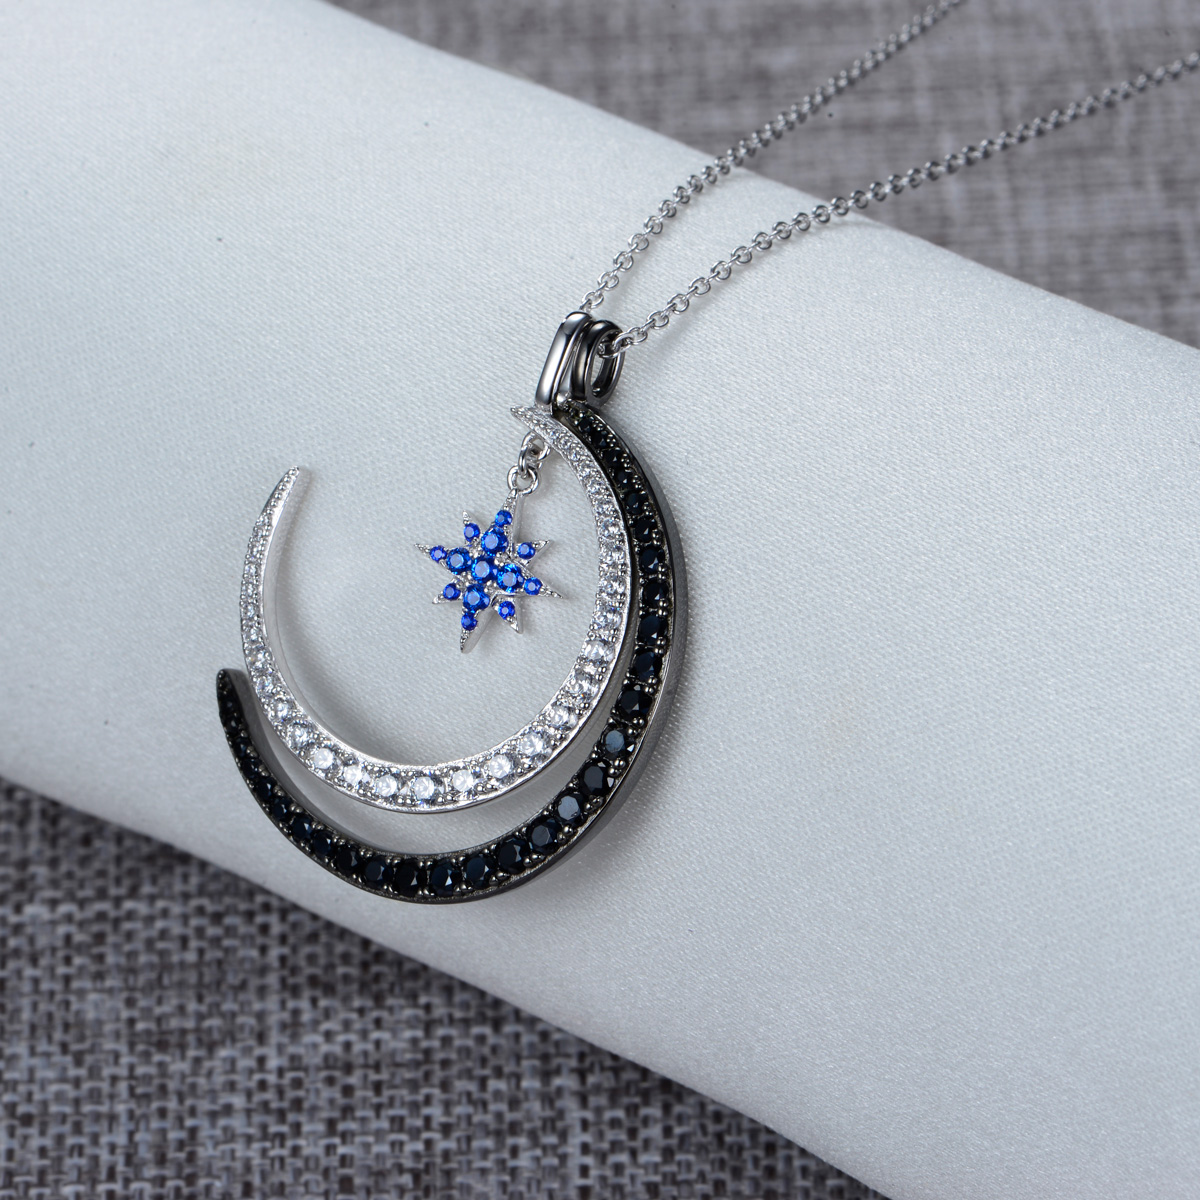 Star moon pendant necklace